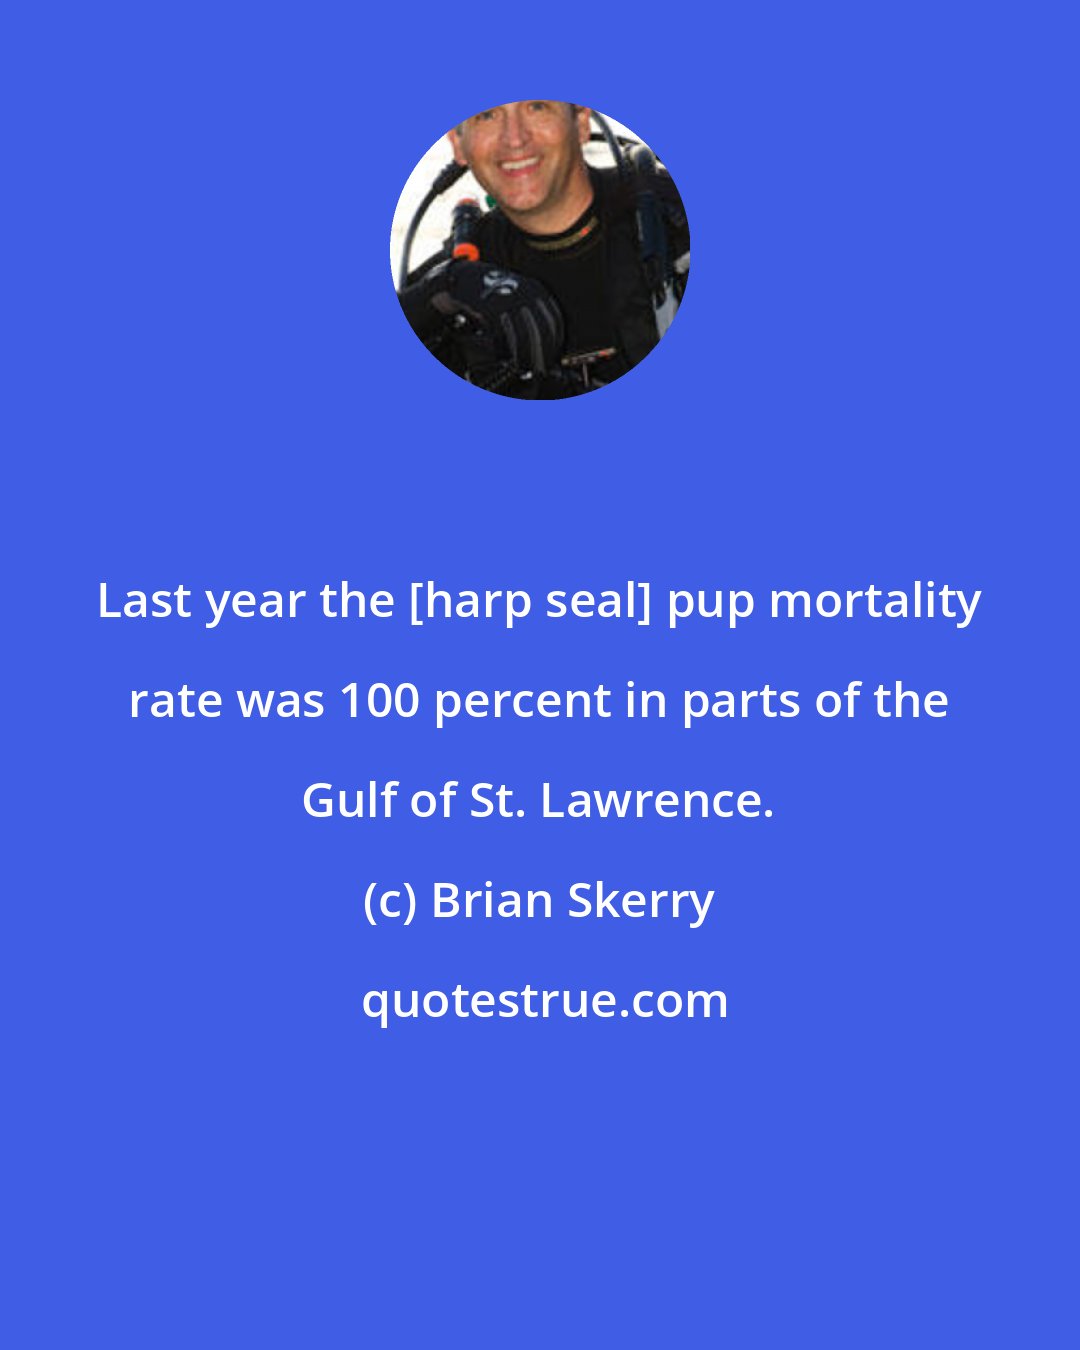 Brian Skerry: Last year the [harp seal] pup mortality rate was 100 percent in parts of the Gulf of St. Lawrence.